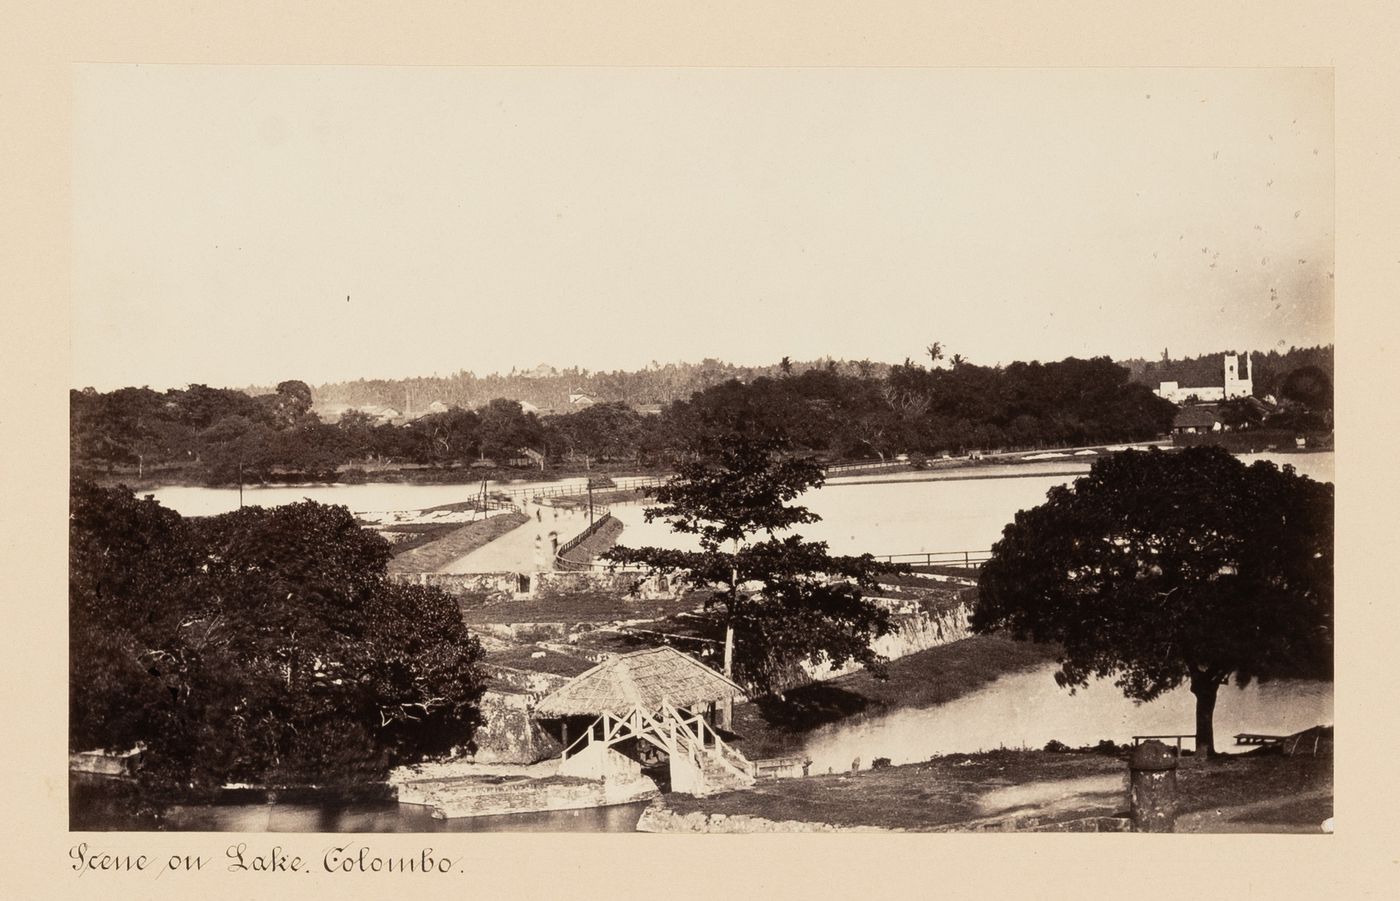 View of a lake showing a footpath, fortifications and a footbridge, Colombo, Ceylon (now Sri Lanka)